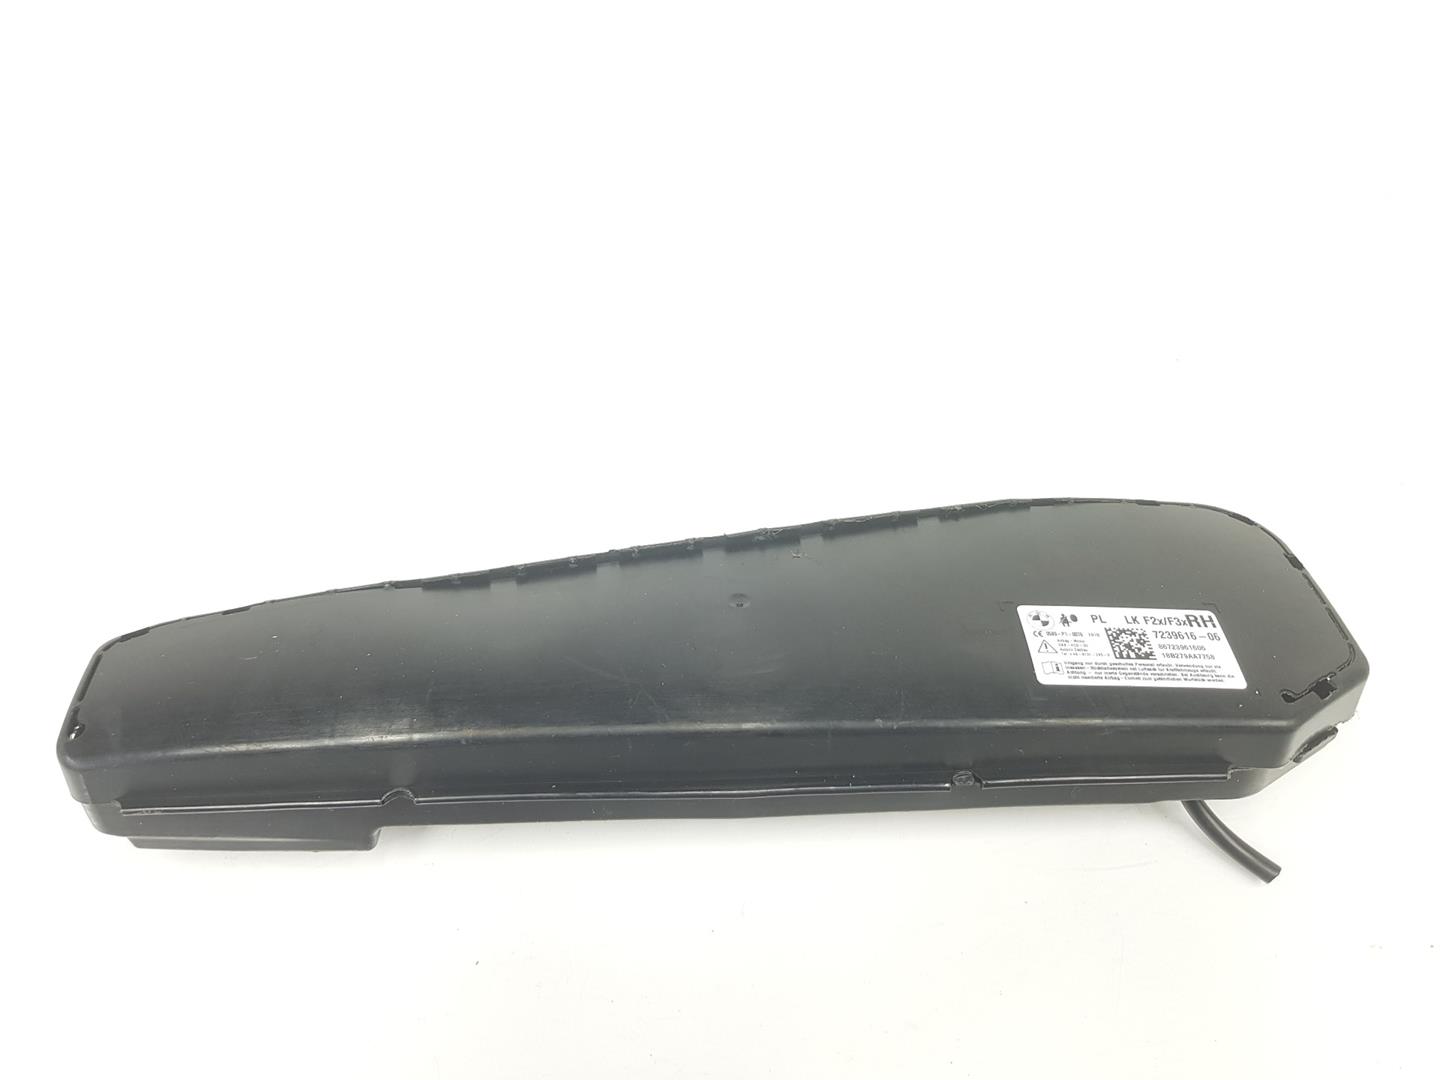 BMW 1 Series F20/F21 (2011-2020) Front Right Door Airbag SRS 7239616, 72127239616, 1141CB 23754447